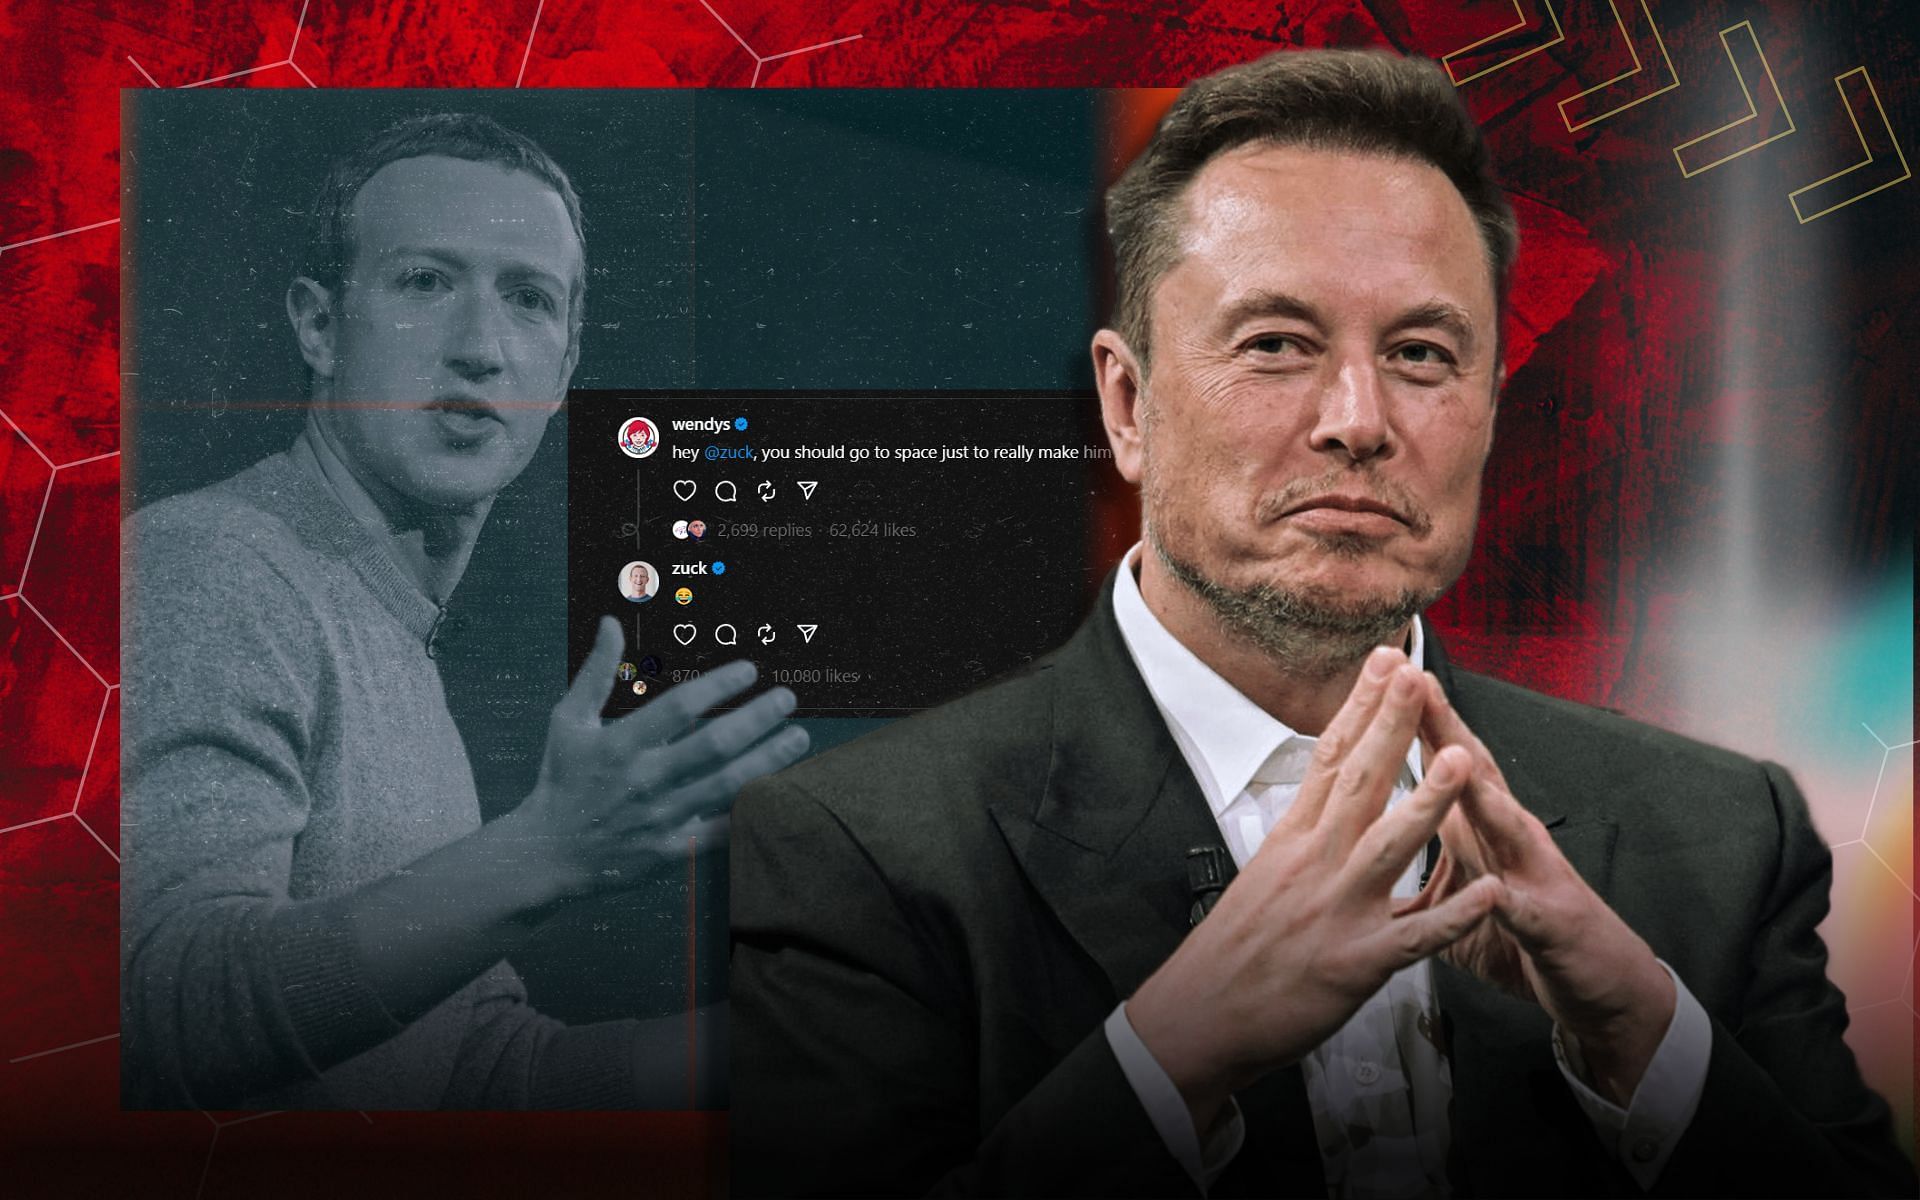 Elon Musk and Mark Zuckerberg exchanges jabs again. [Image credits: @dailyloud and @QndzyNews on Twitter]